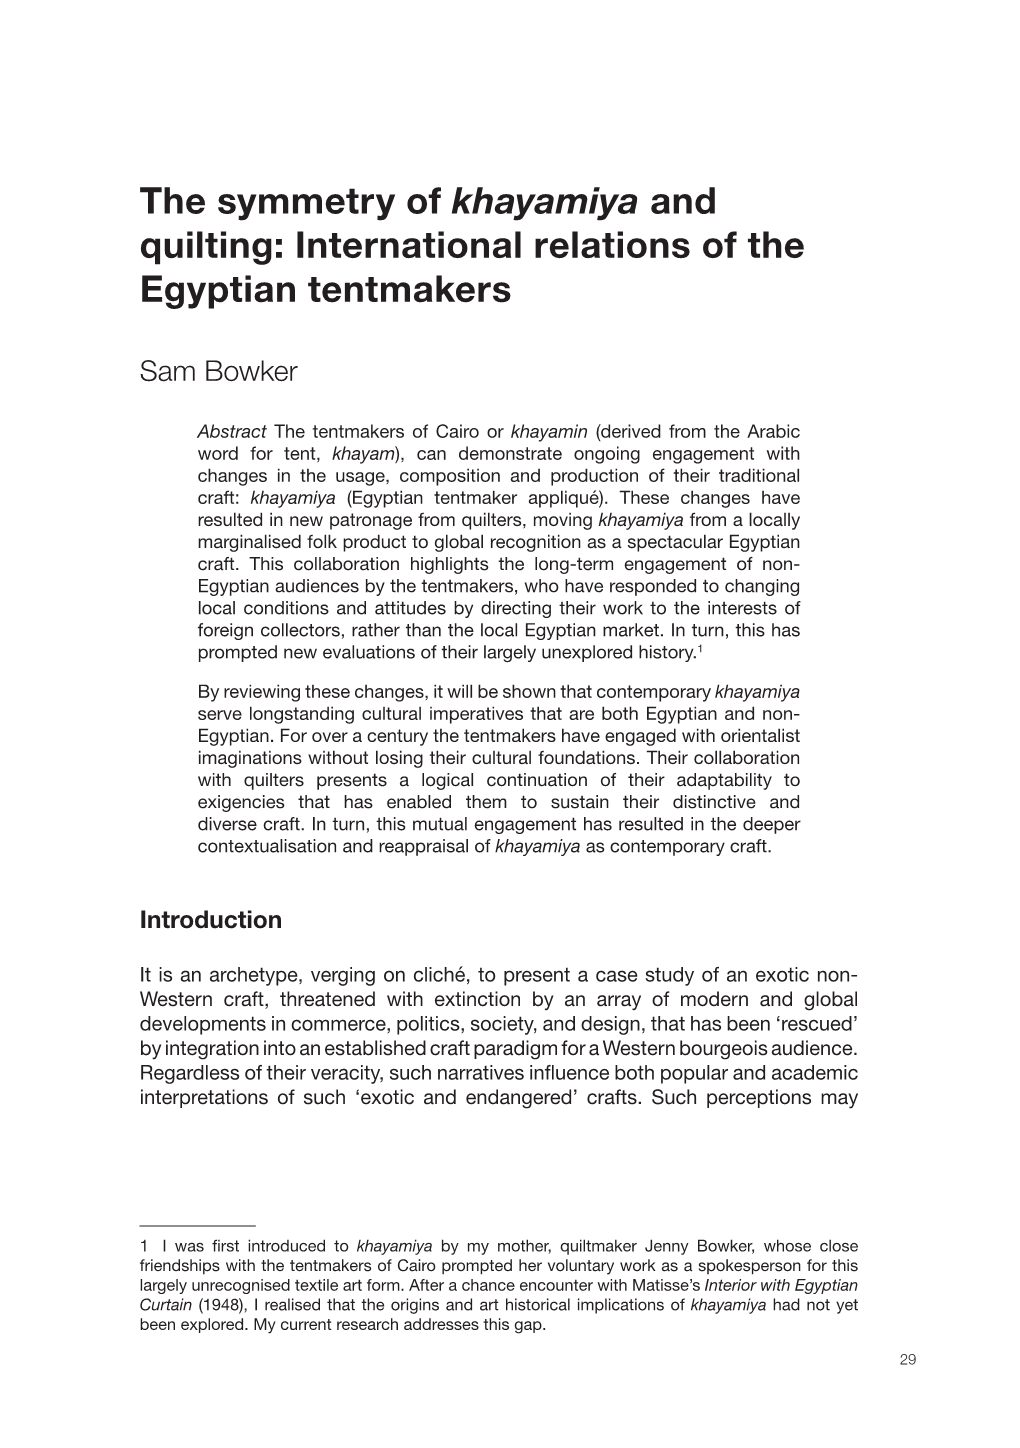 The Symmetry of Khayamiya and Quilting: International Relations of the Egyptian Tentmakers